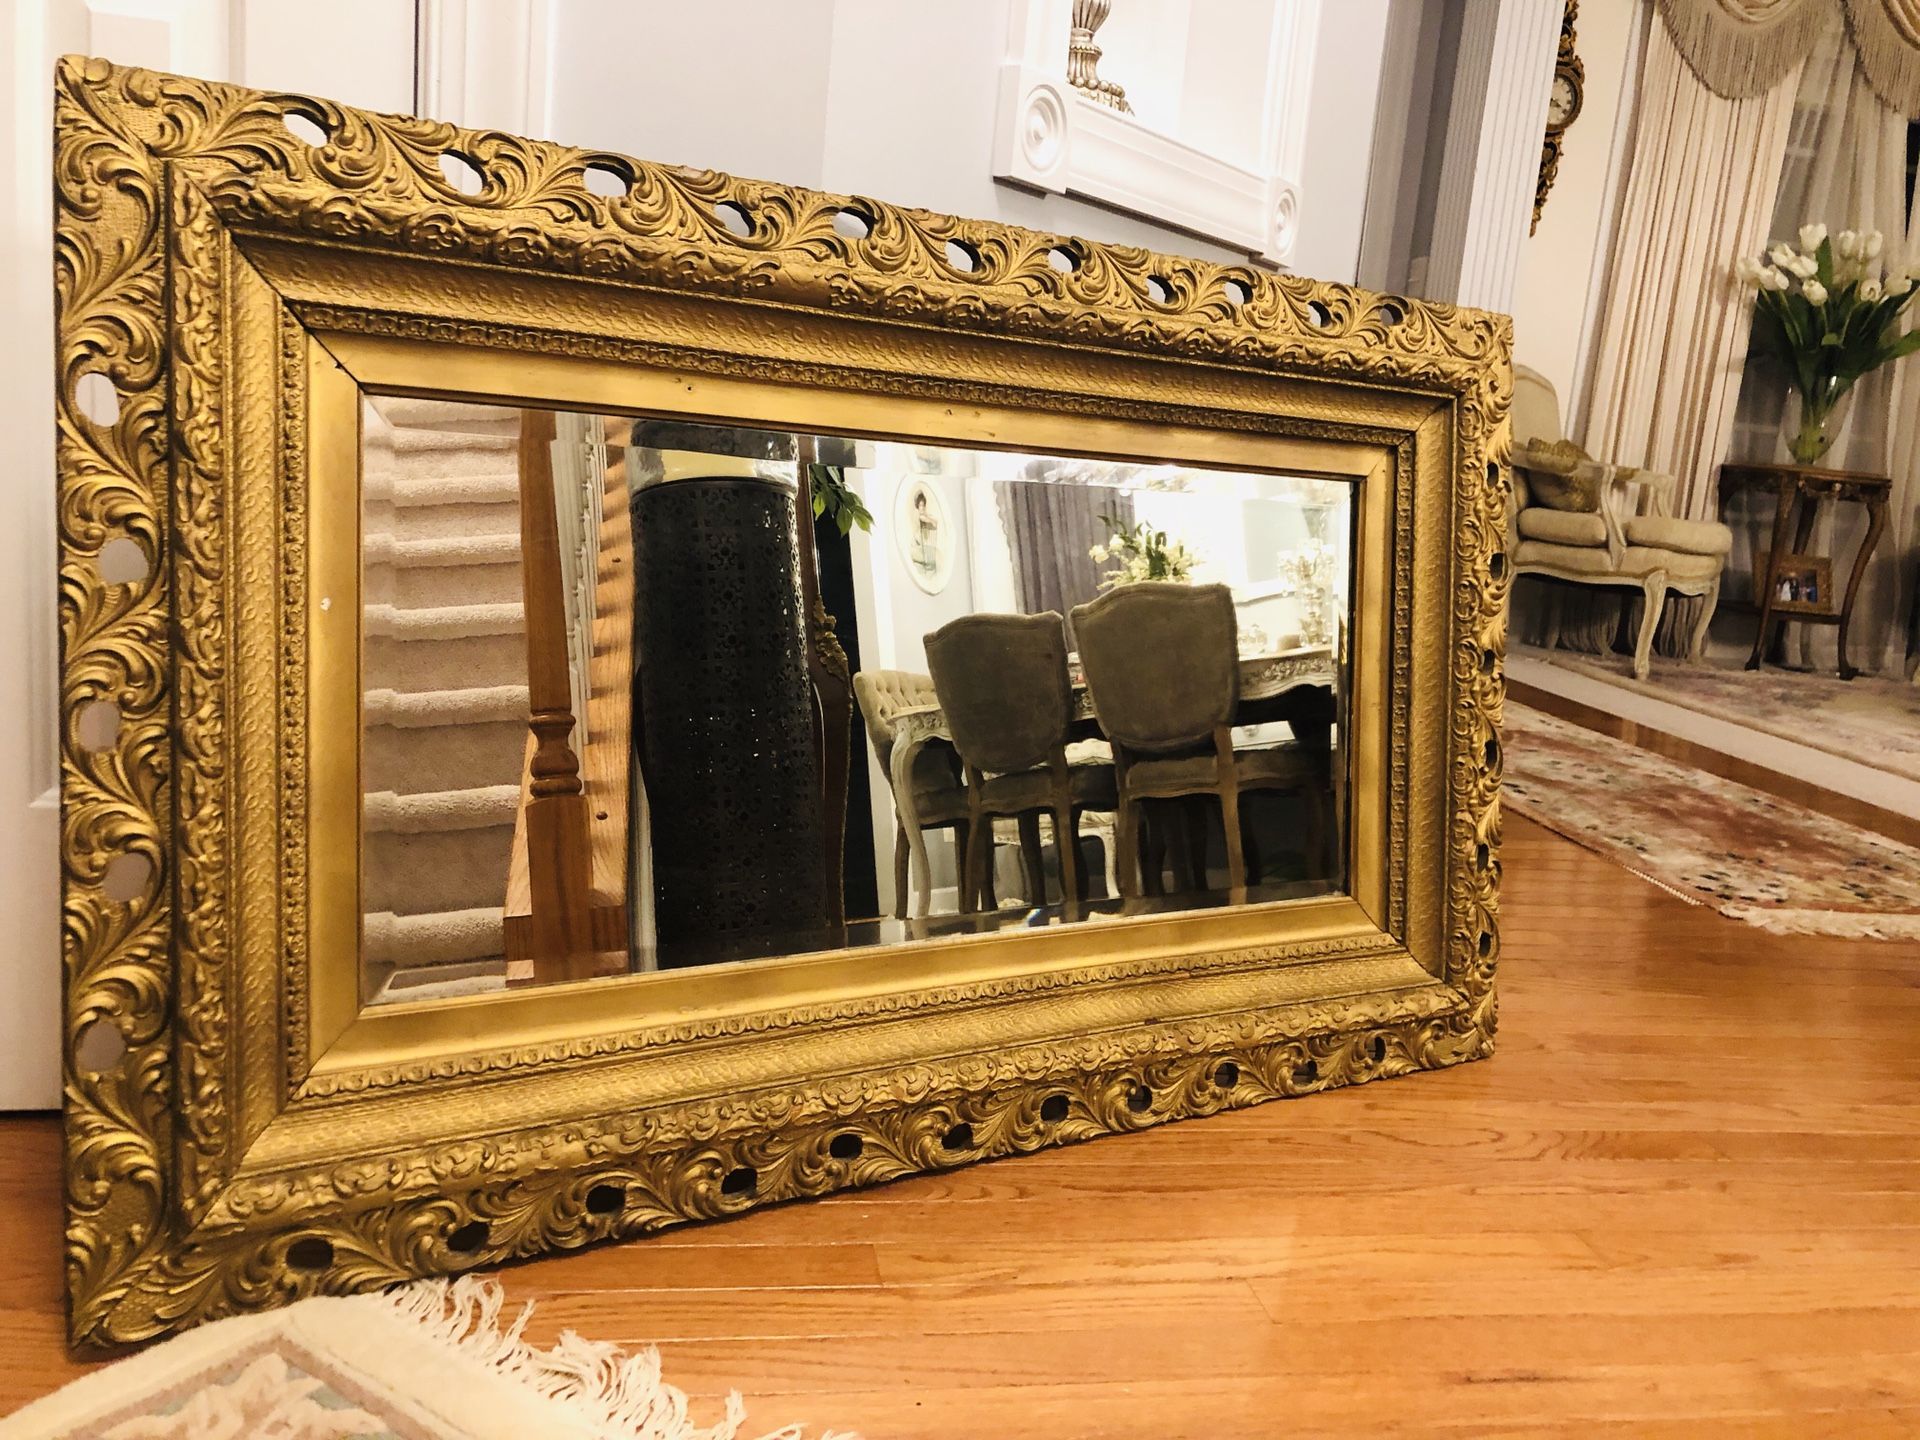 50”X29” large Super Antique ornate wood heavy Gold mirror “SERIOUS BUYERS ONLY “